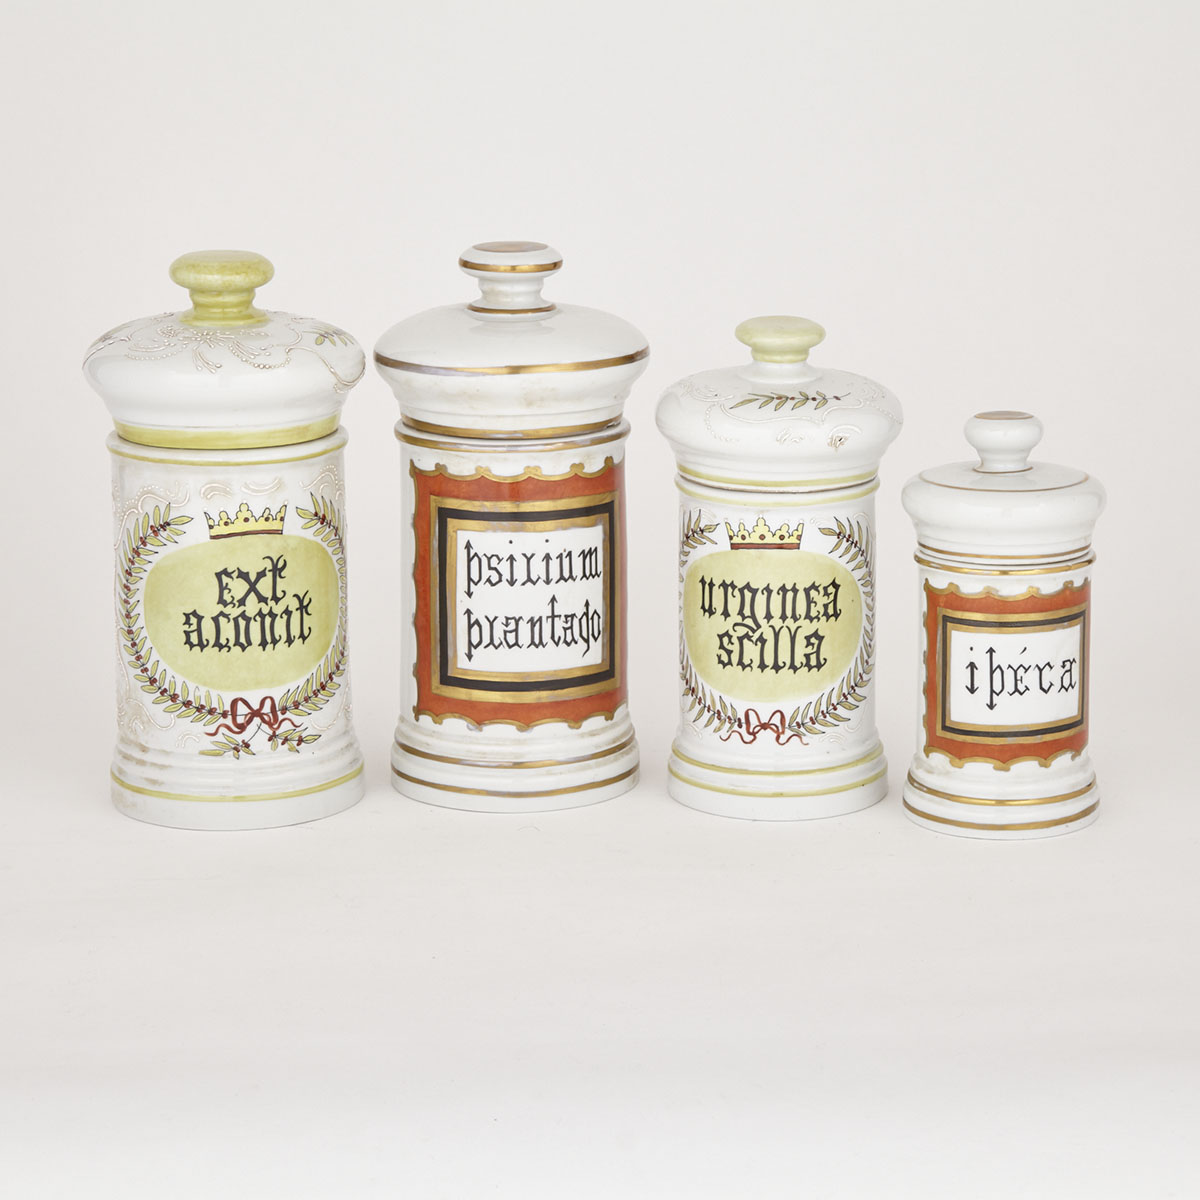 Four French Porcelain Apothecary Jars, 20th century